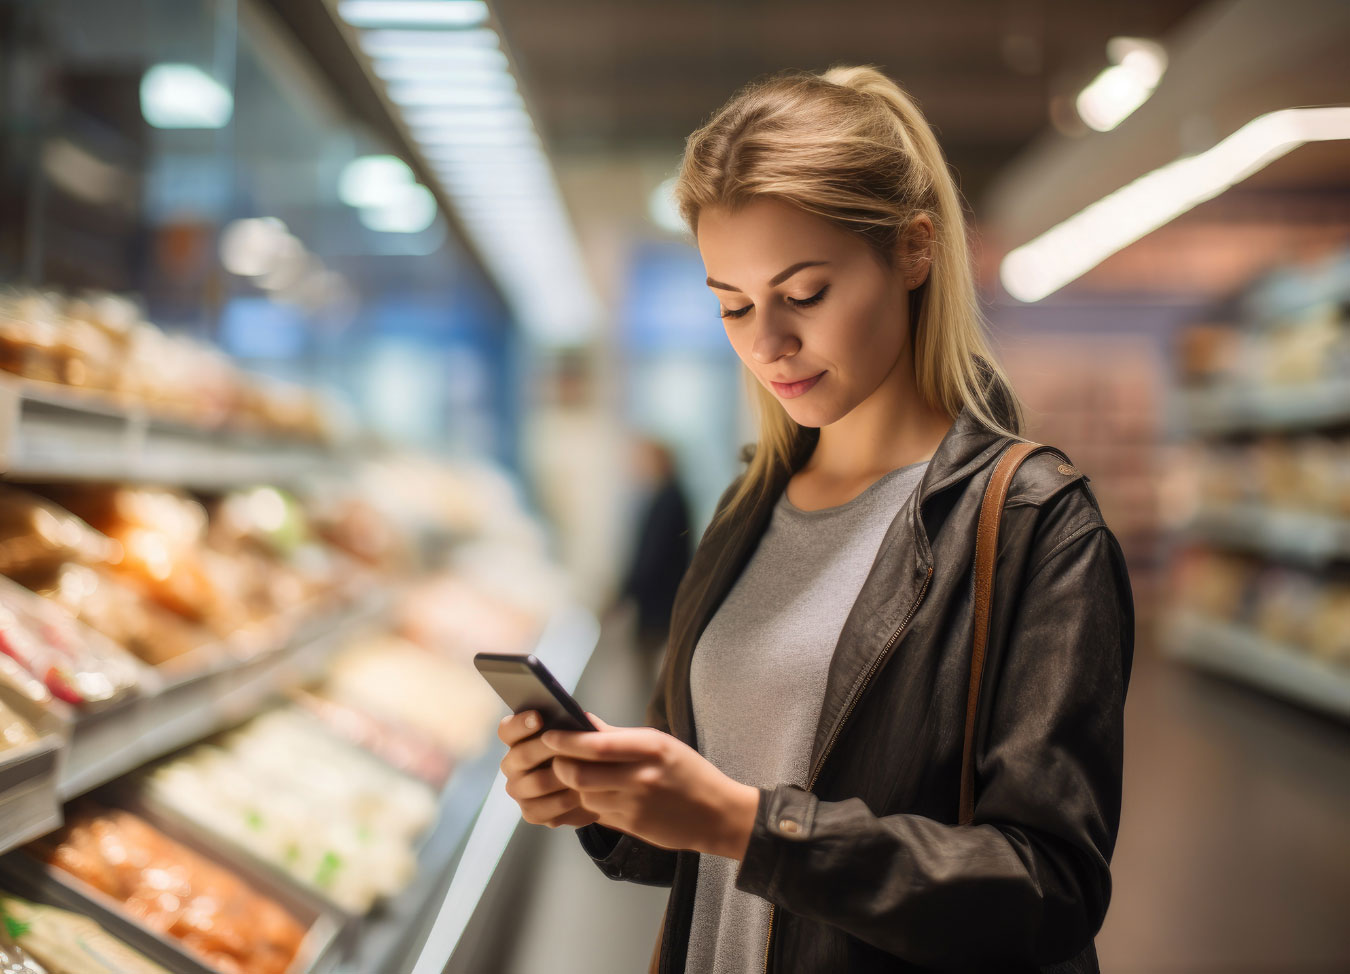 Woman in convenience store aisle with phone in hand